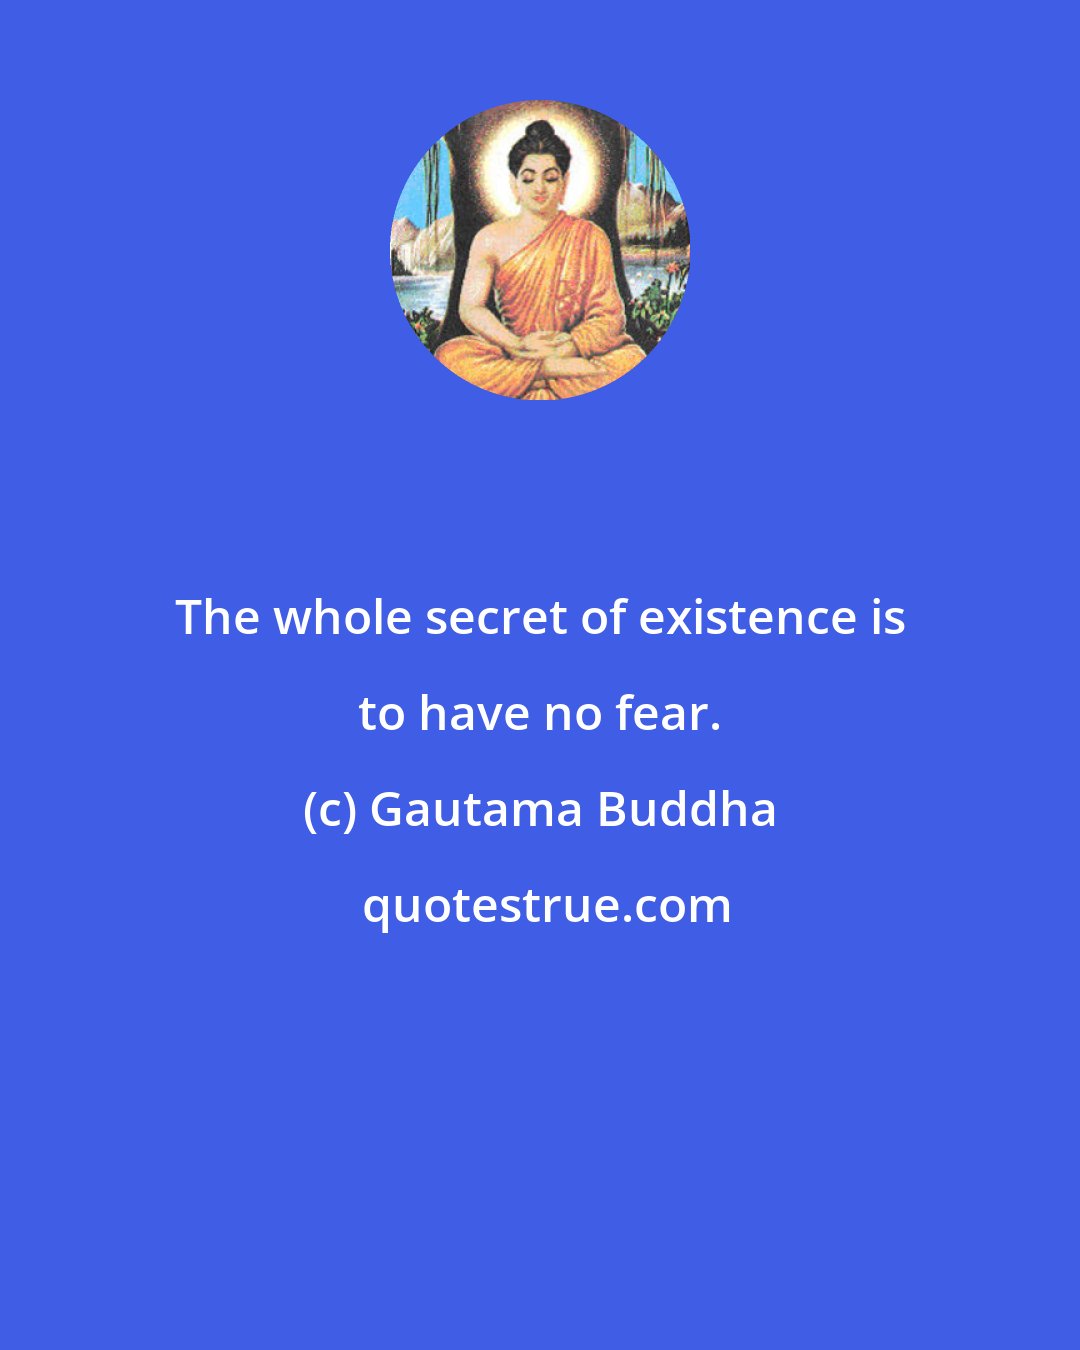 Gautama Buddha: The whole secret of existence is to have no fear.